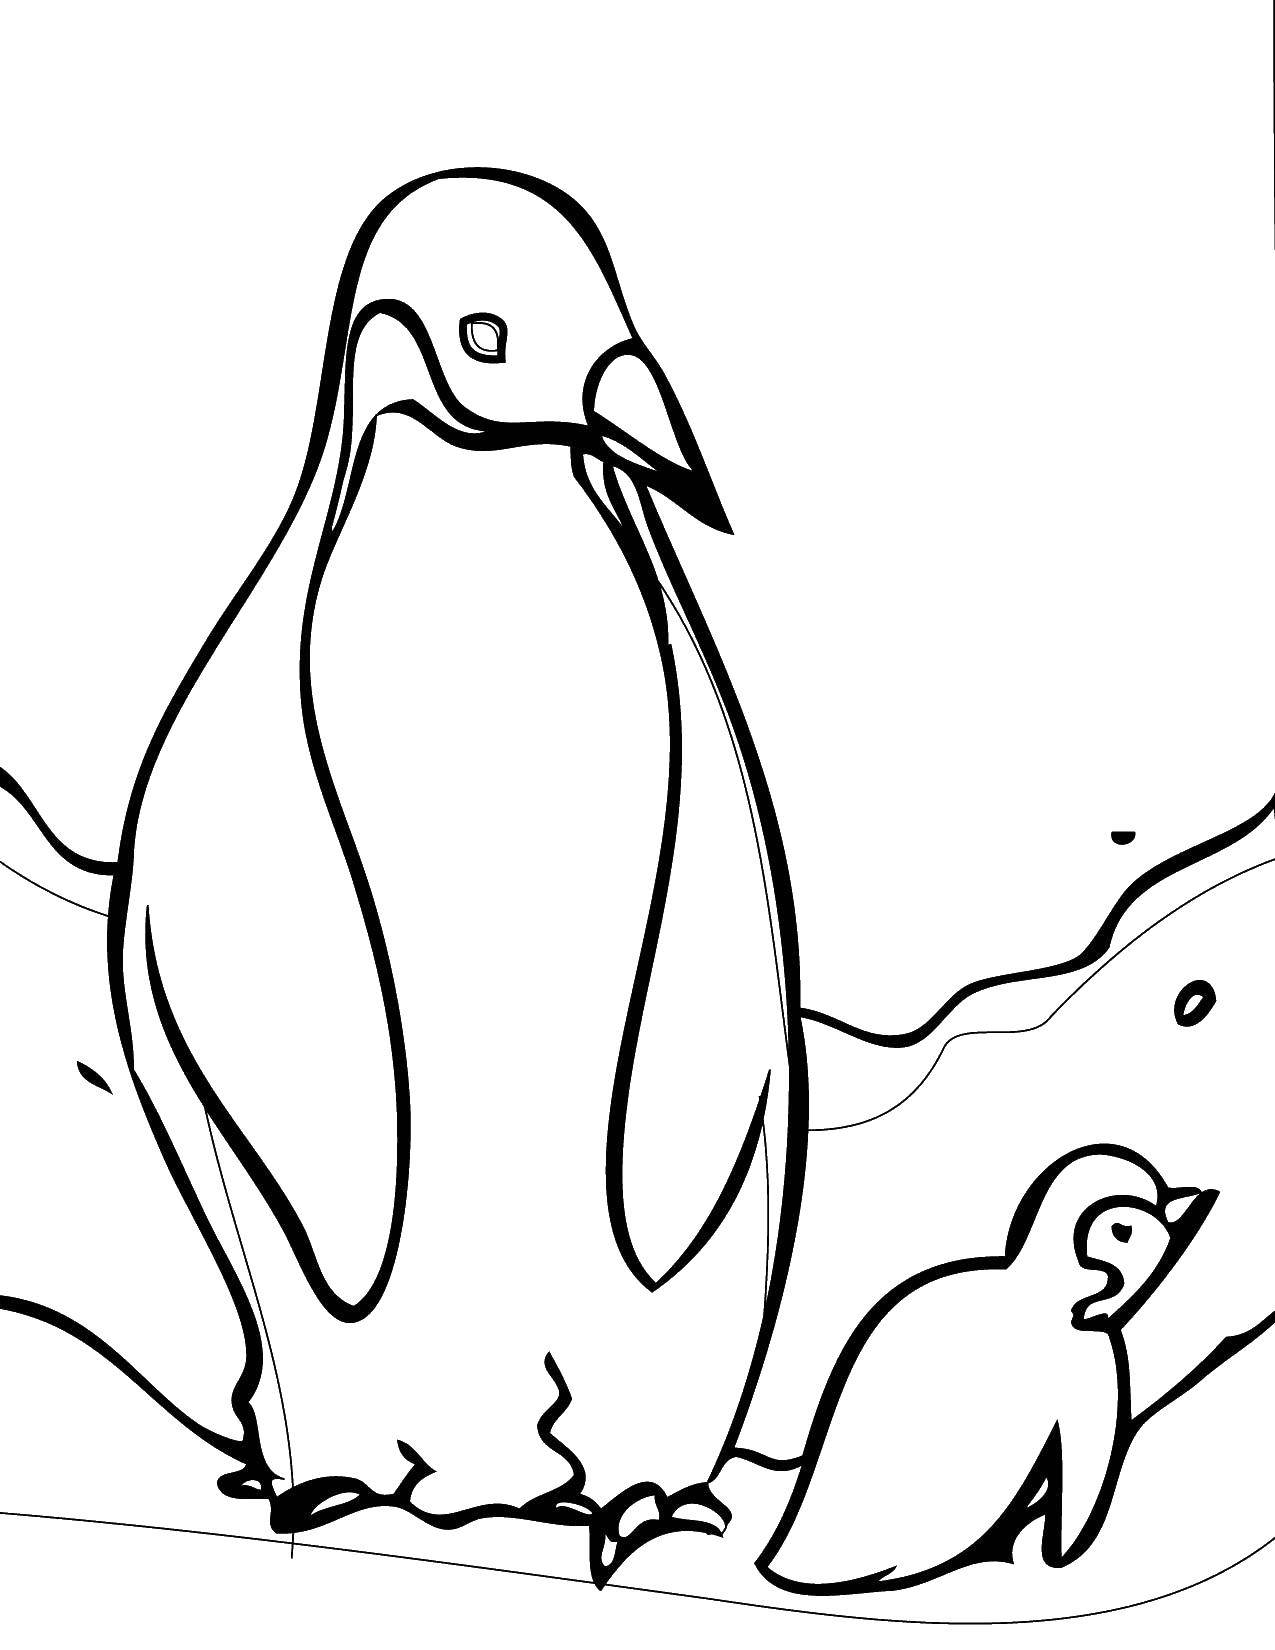 Coloring Penguins. Category Wild animals. Tags:  Birds, penguin.